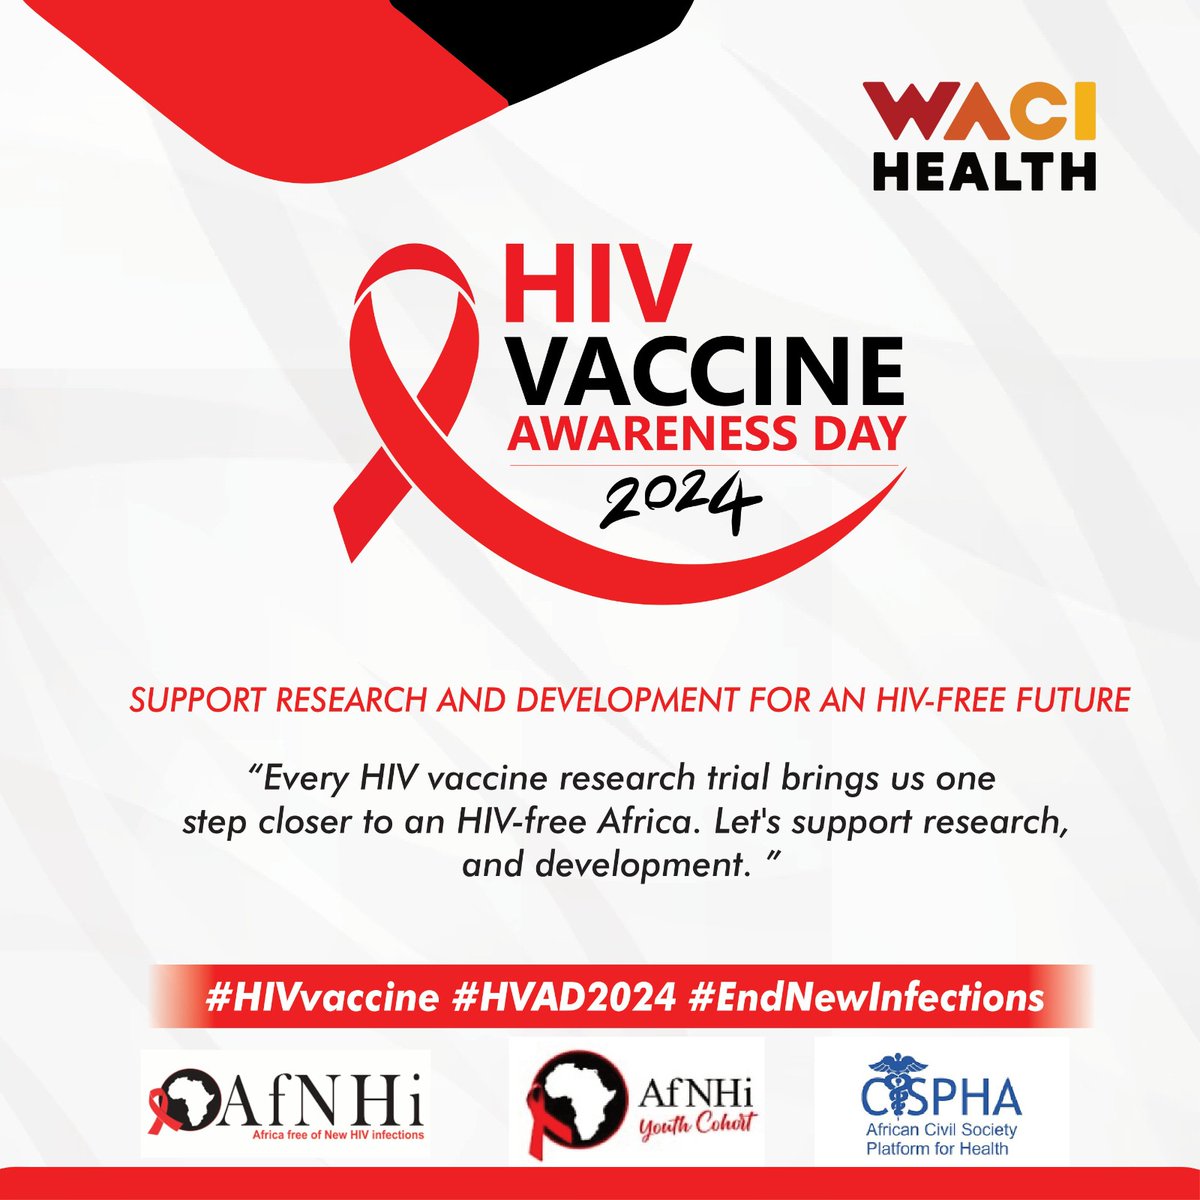 Today, on #HVAD2024, we stand united in our mission to advocate for HIV vaccine research in Africa. Let's work together towards a future free from new HIV infections. #HIVvaccine #HVAD2024 #EndNewInfections @HIVpxresearch @Aidsfonds_intl @WACIHealth @Vaccine @HIVpxresearch